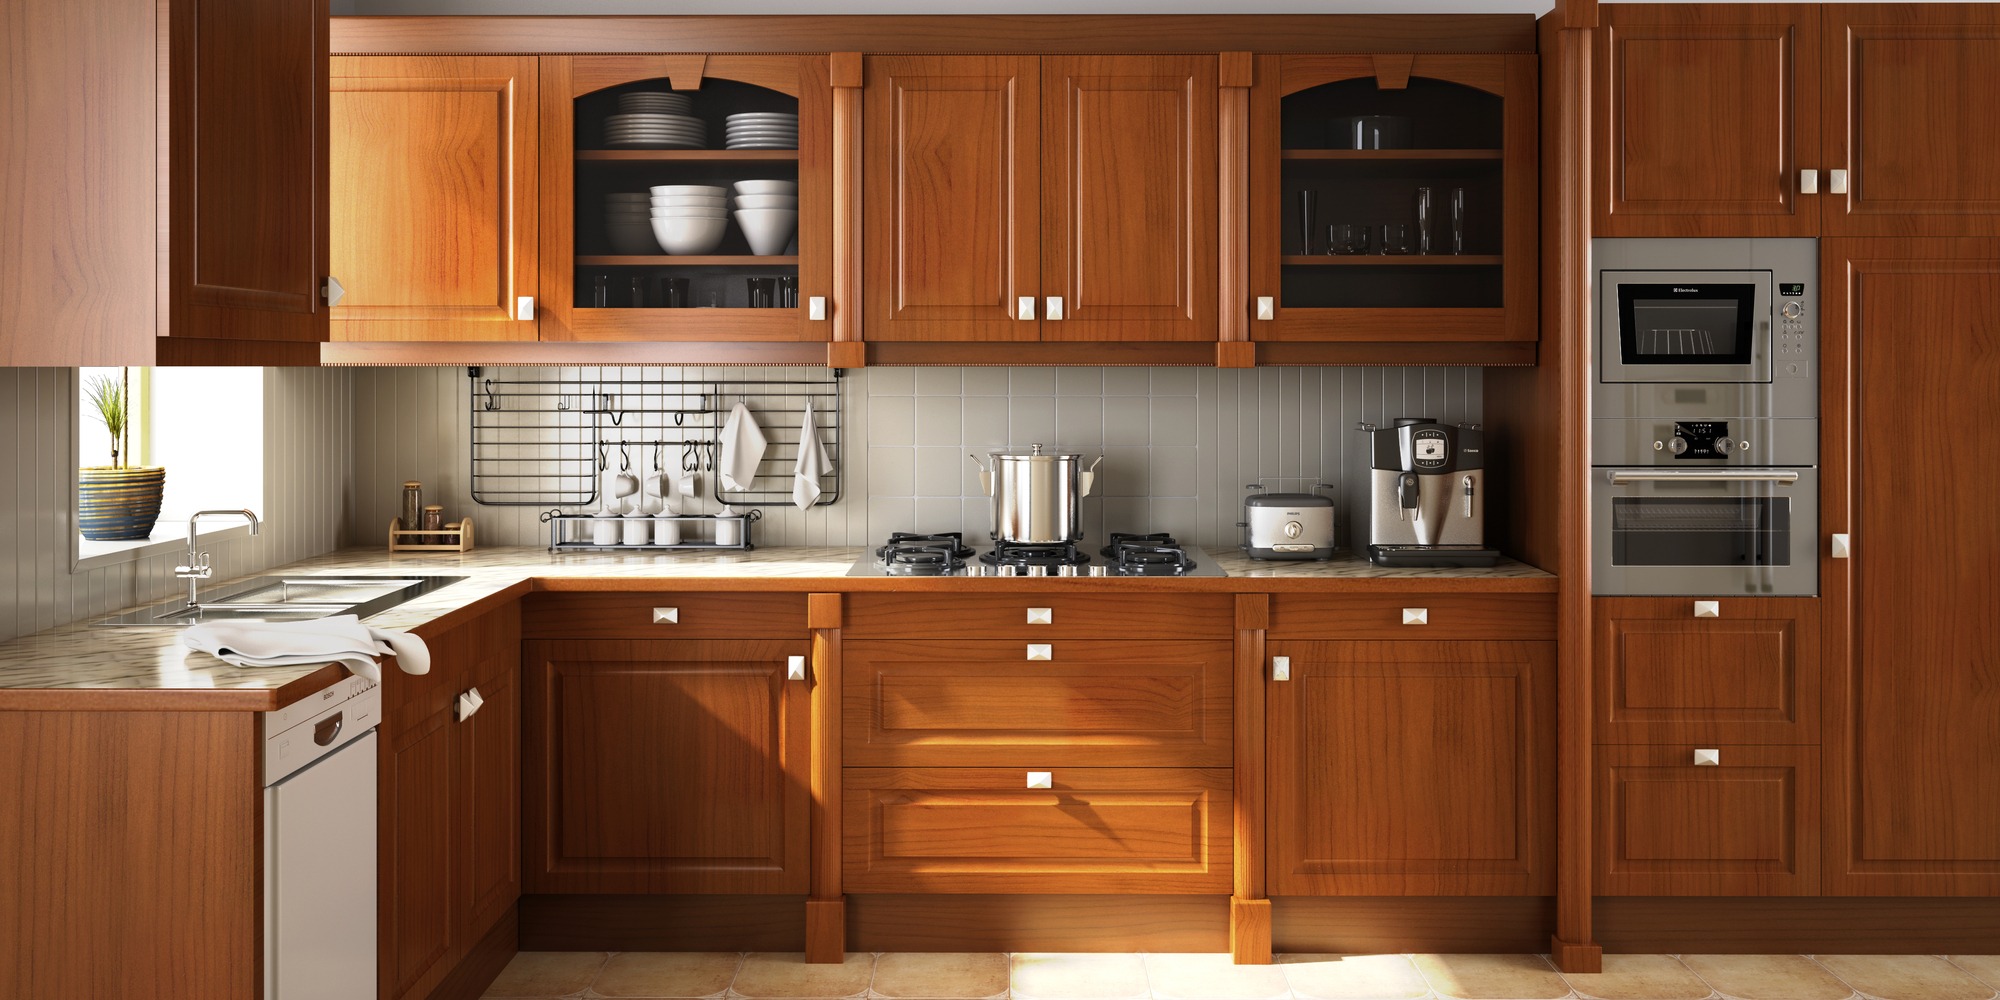 What-Is-the-Average-Lifespan-of-Kitchen-Cabinets